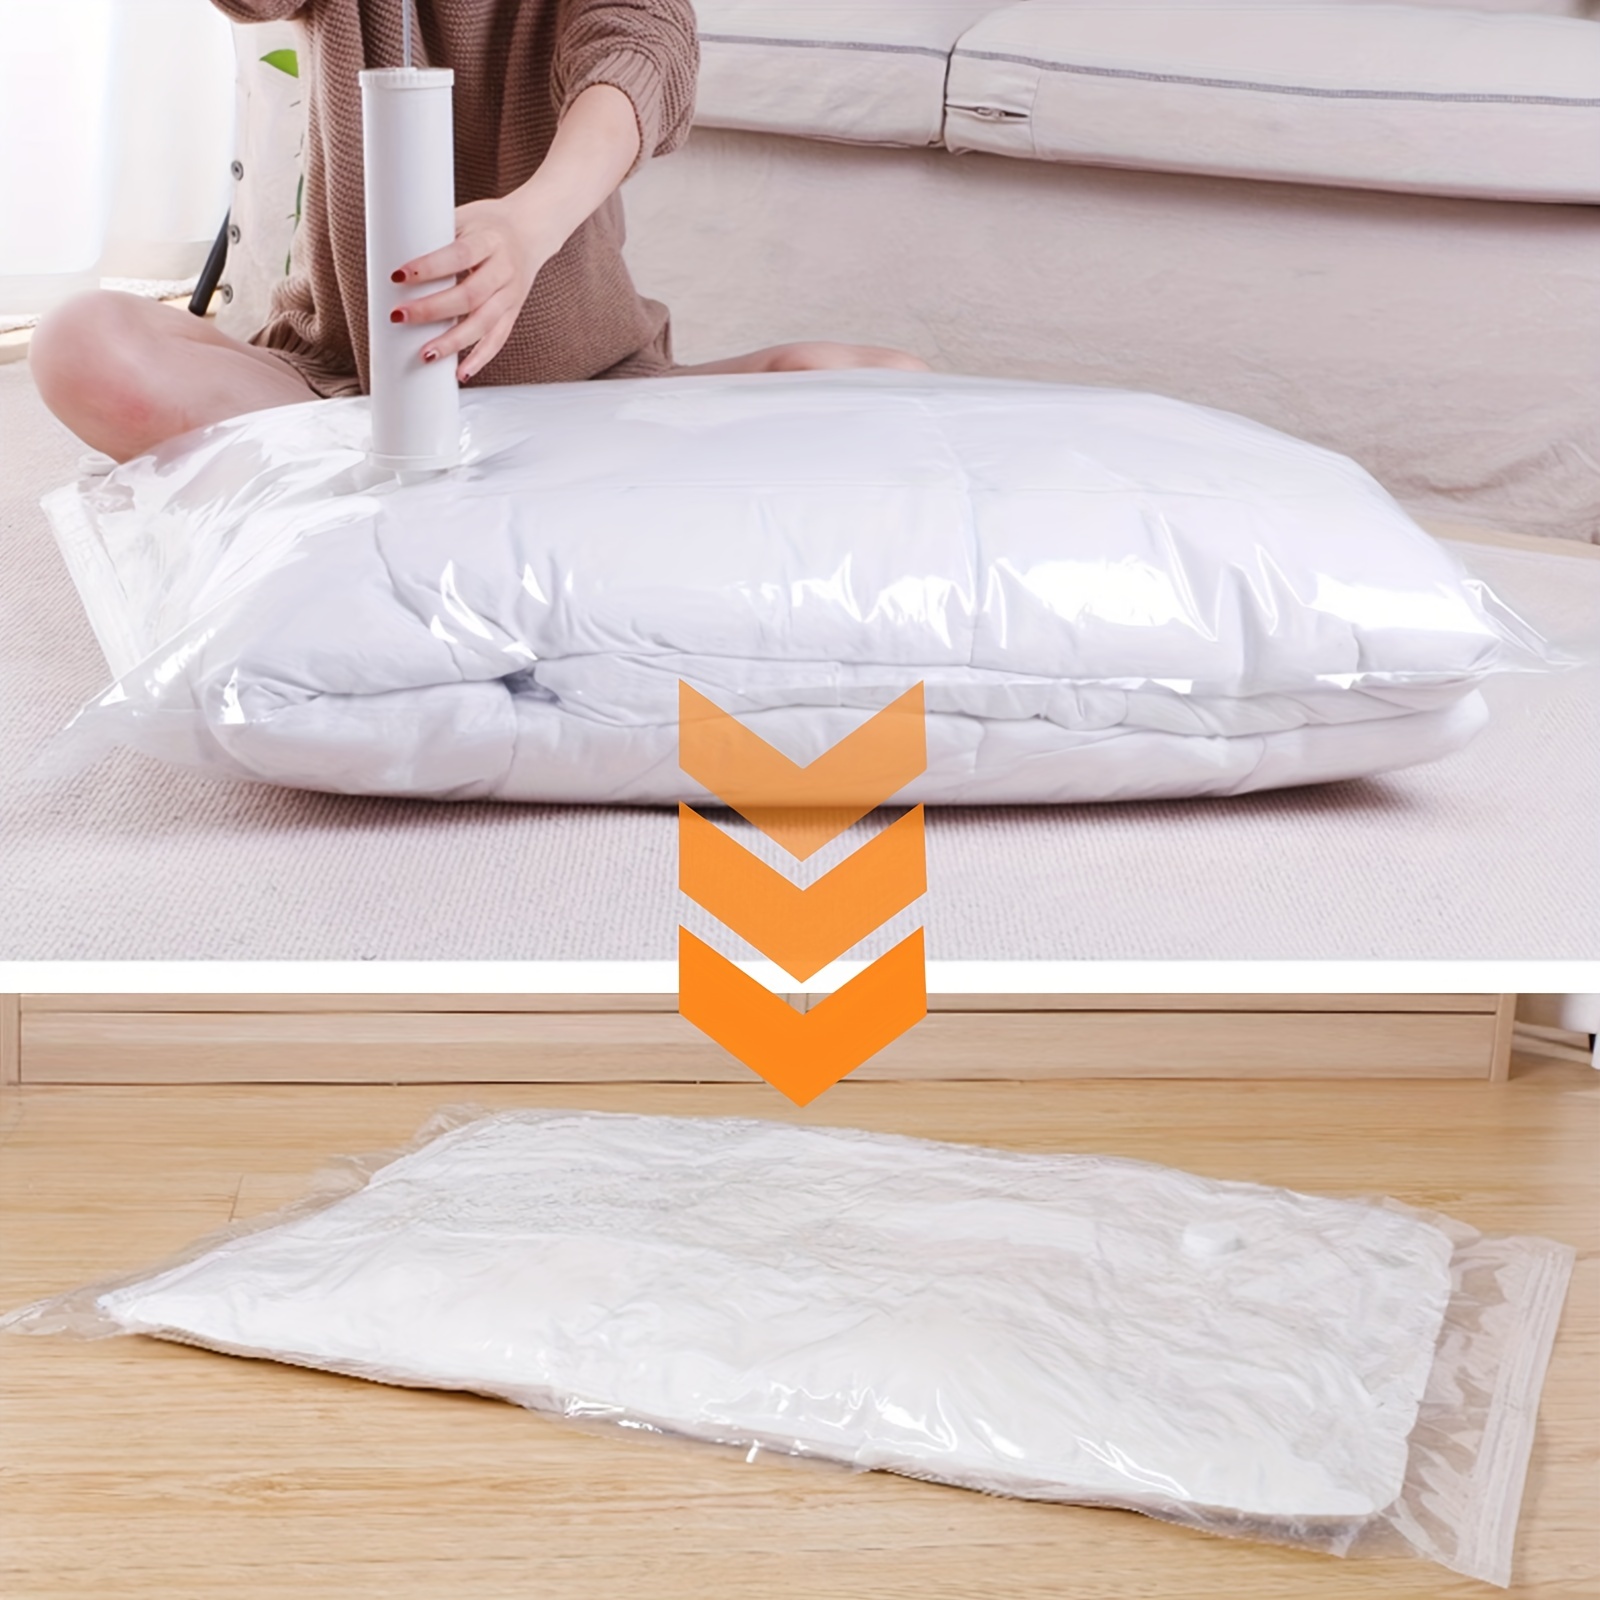 Jumbo Vacuum Storage Bags - Free Up 80% Space For Clothes, Bedding